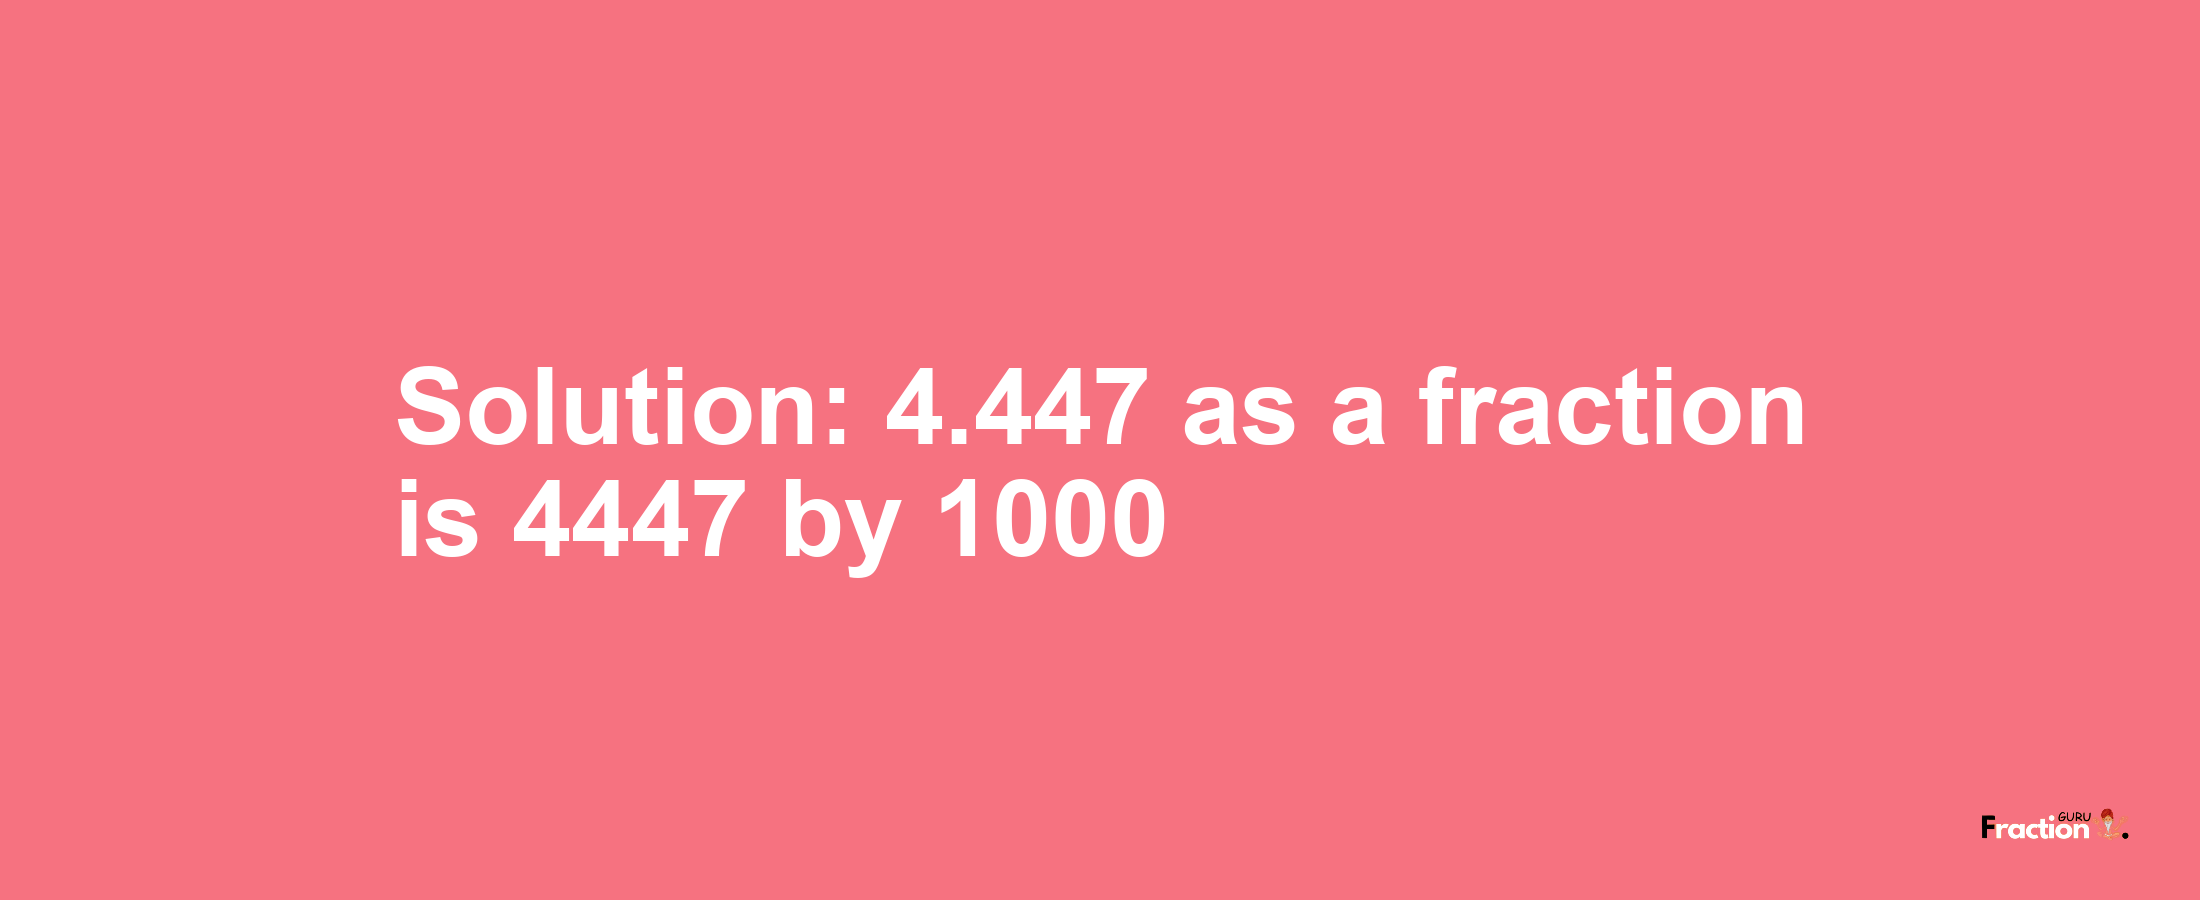 Solution:4.447 as a fraction is 4447/1000